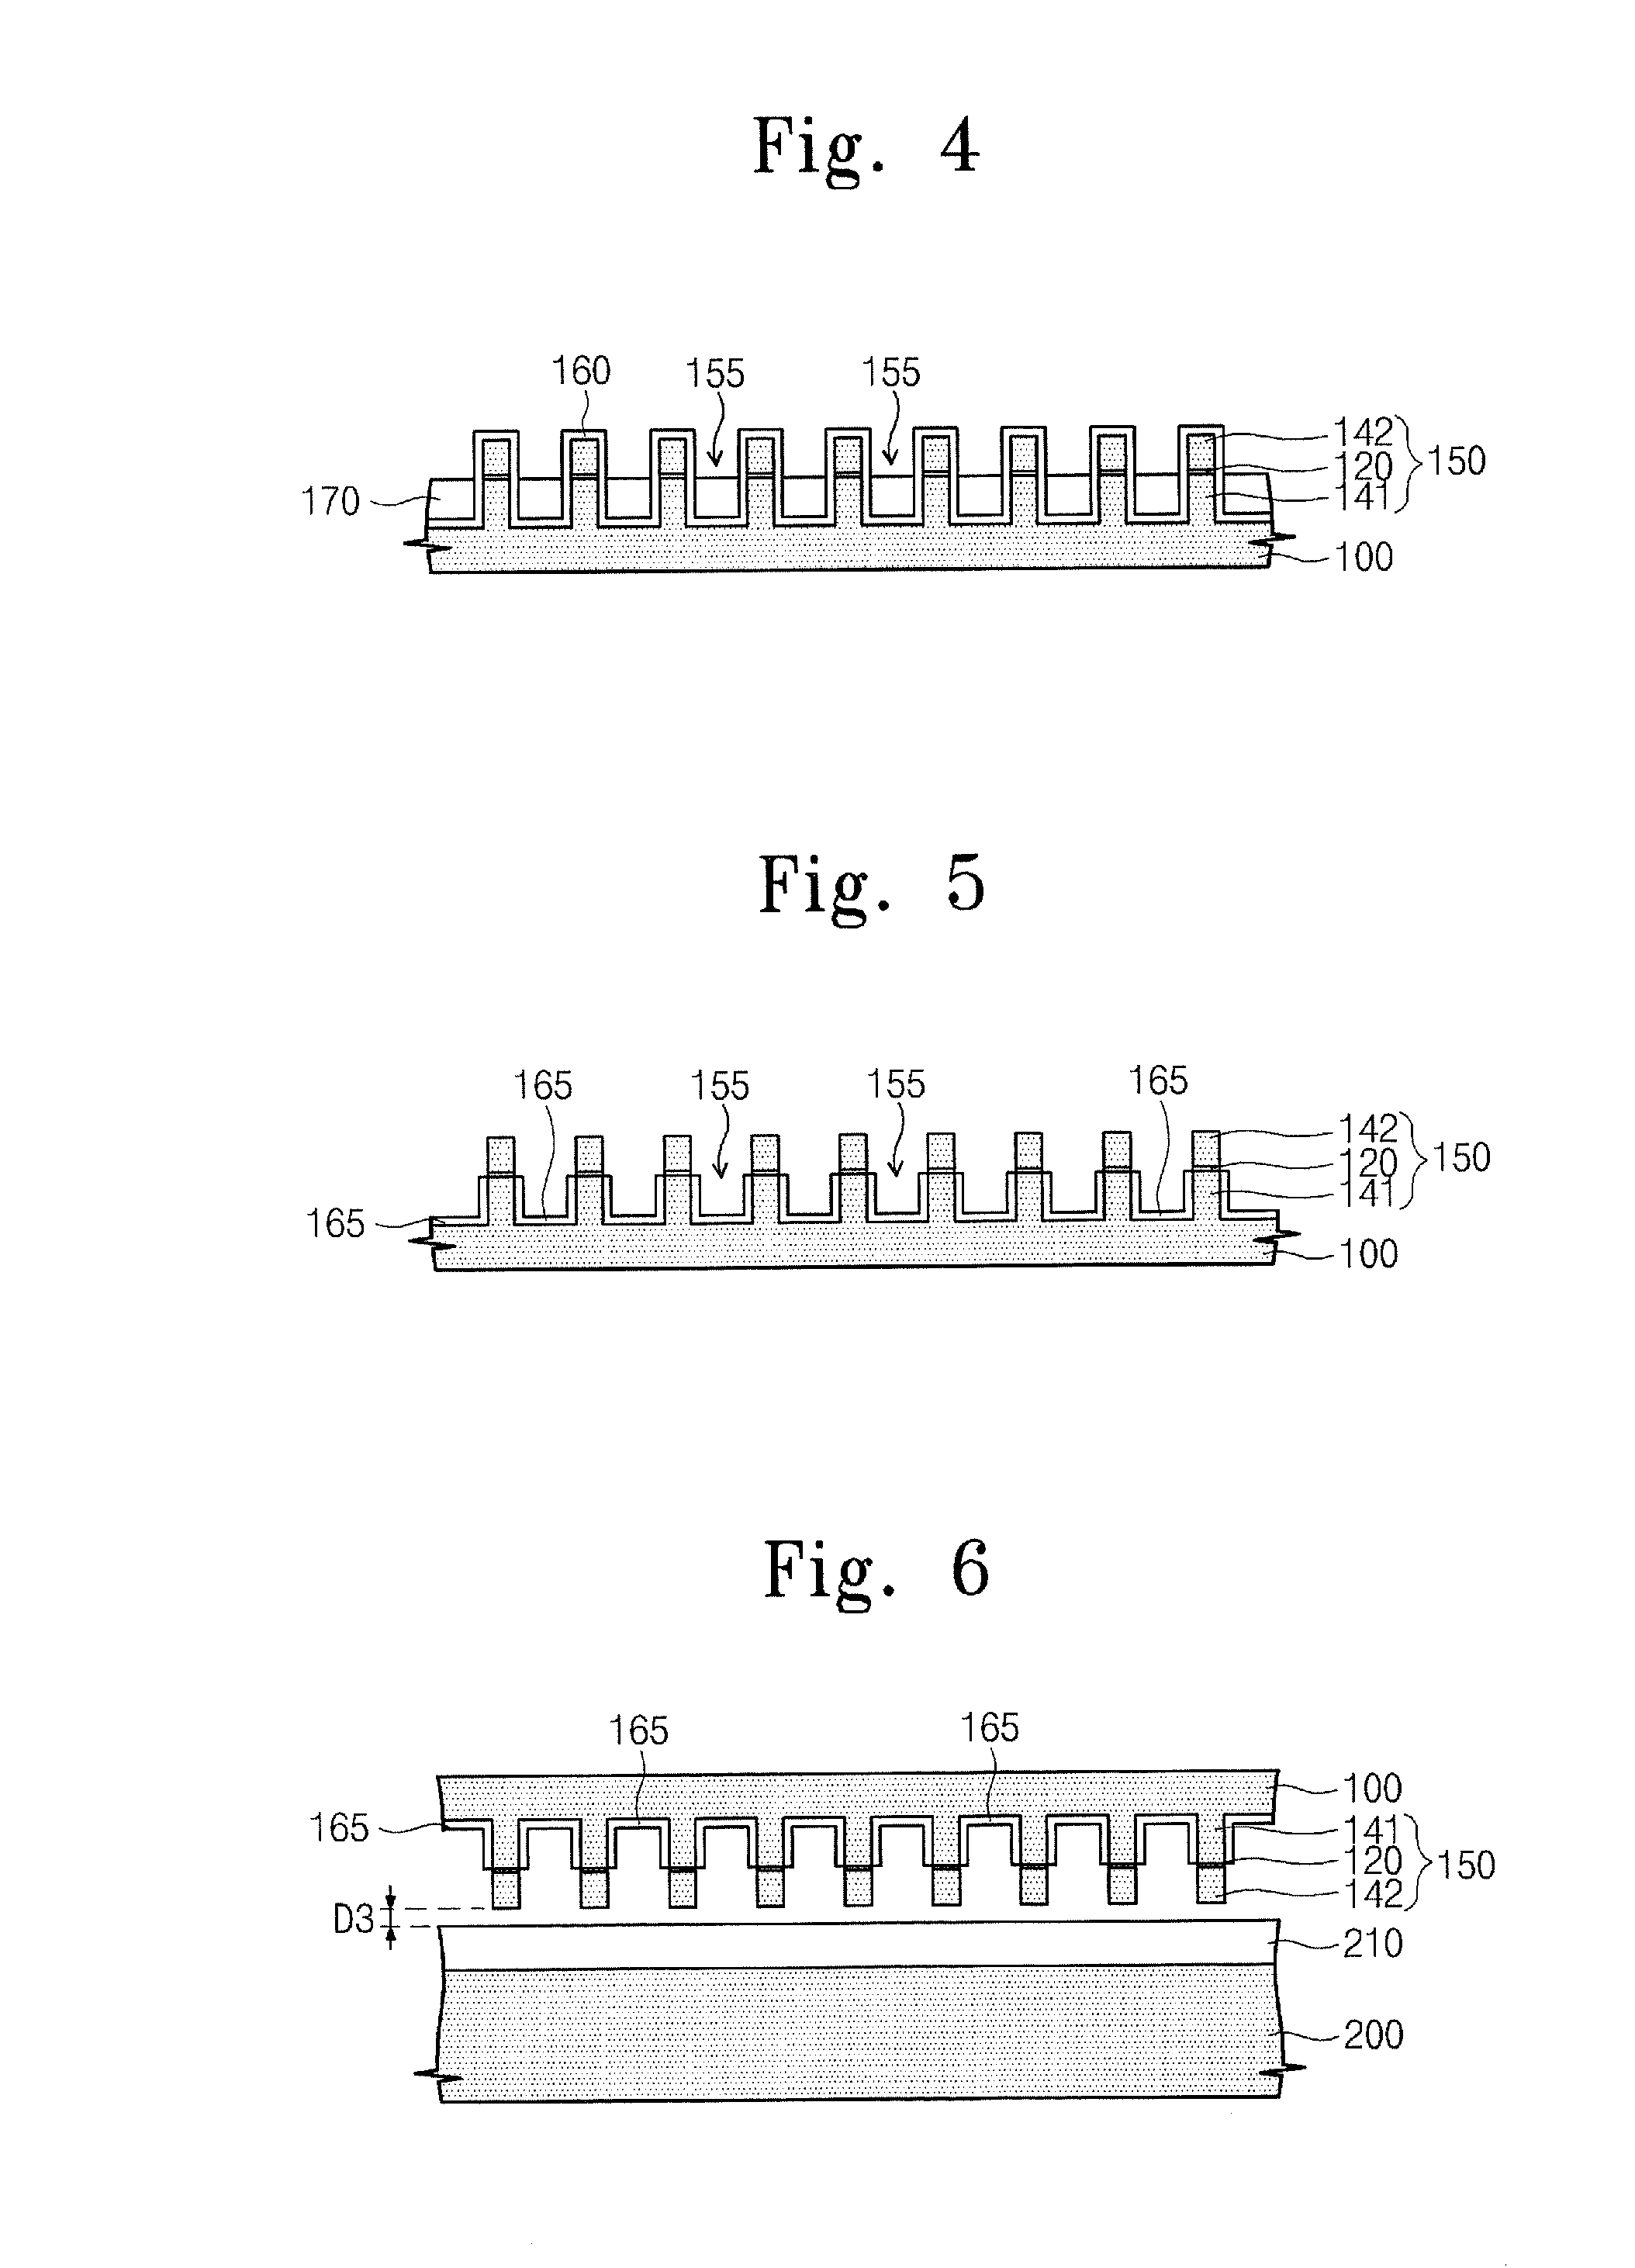 Method of fabricating semiconductor wafer